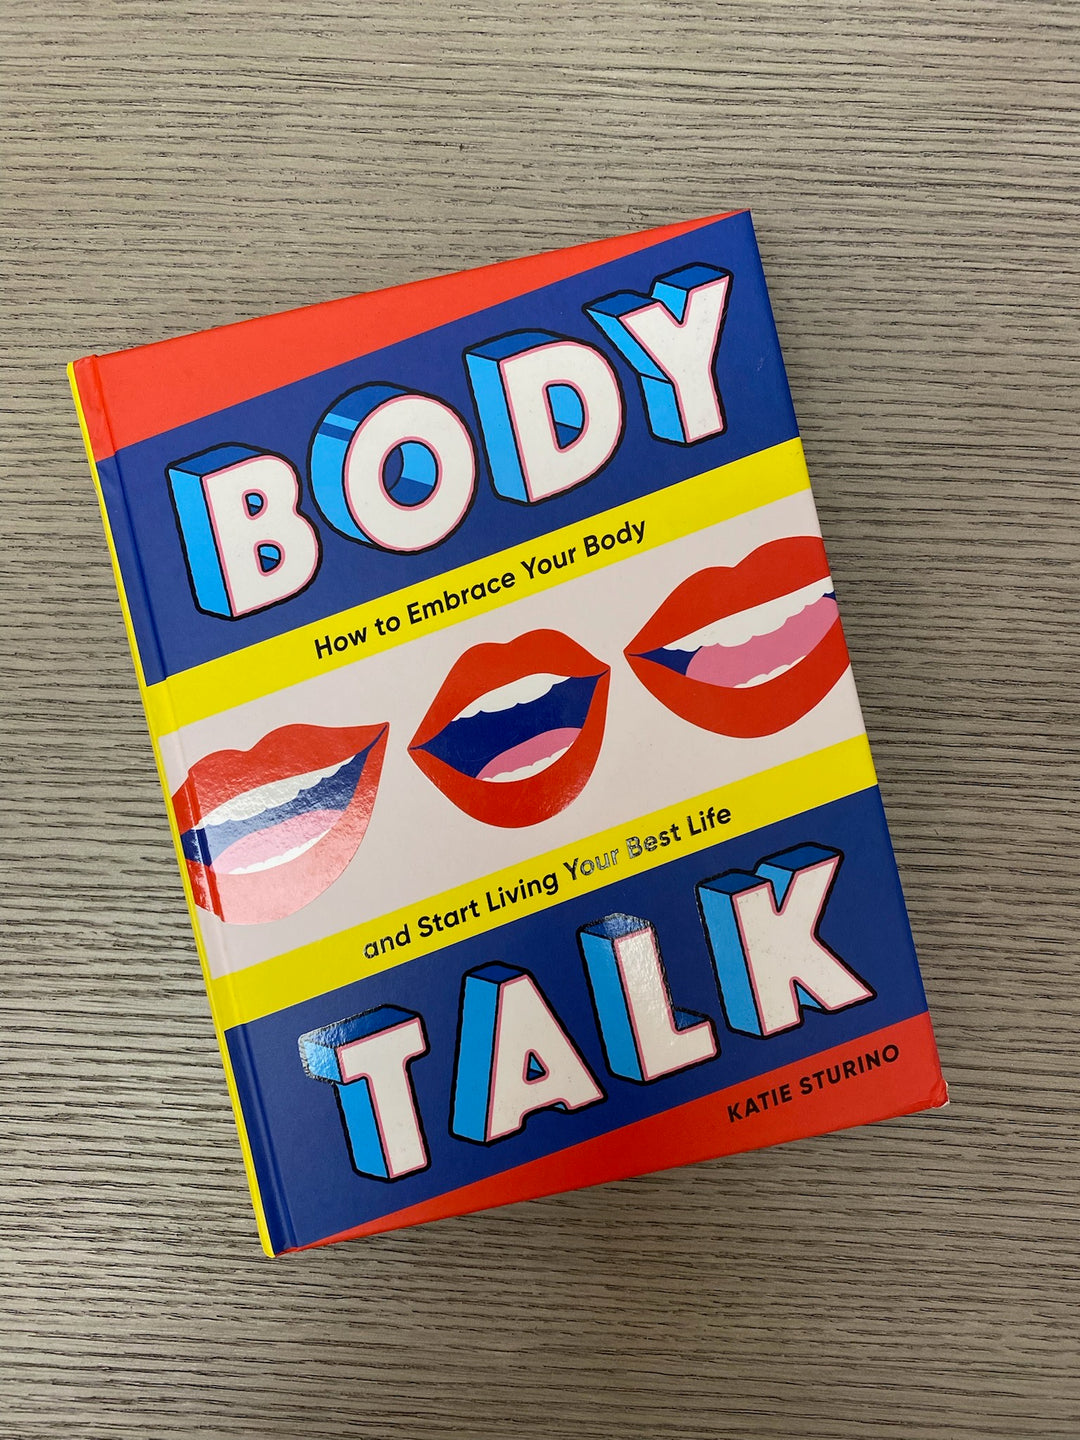 Body Talk: How to Embrace Your Body and Start Living Your Best Life